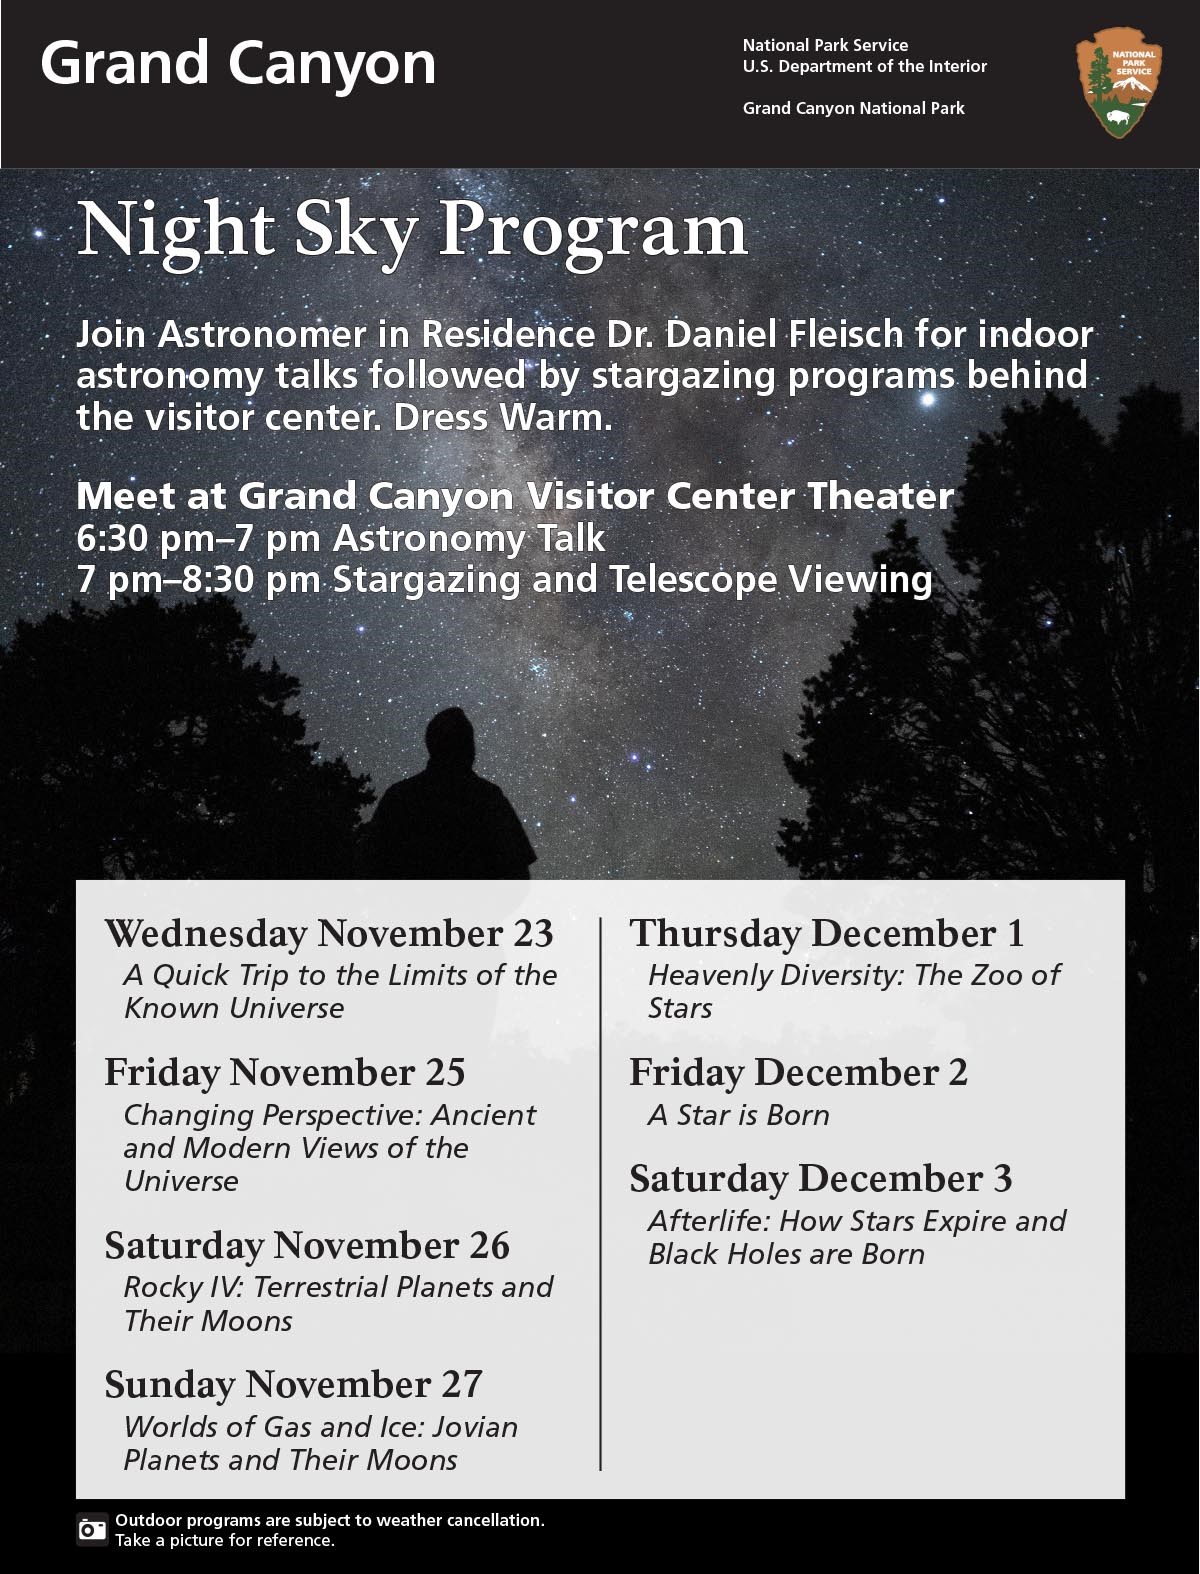 A list of Evening Program topics presented by the Astronomer in Residence. A program flyer with a starry background.